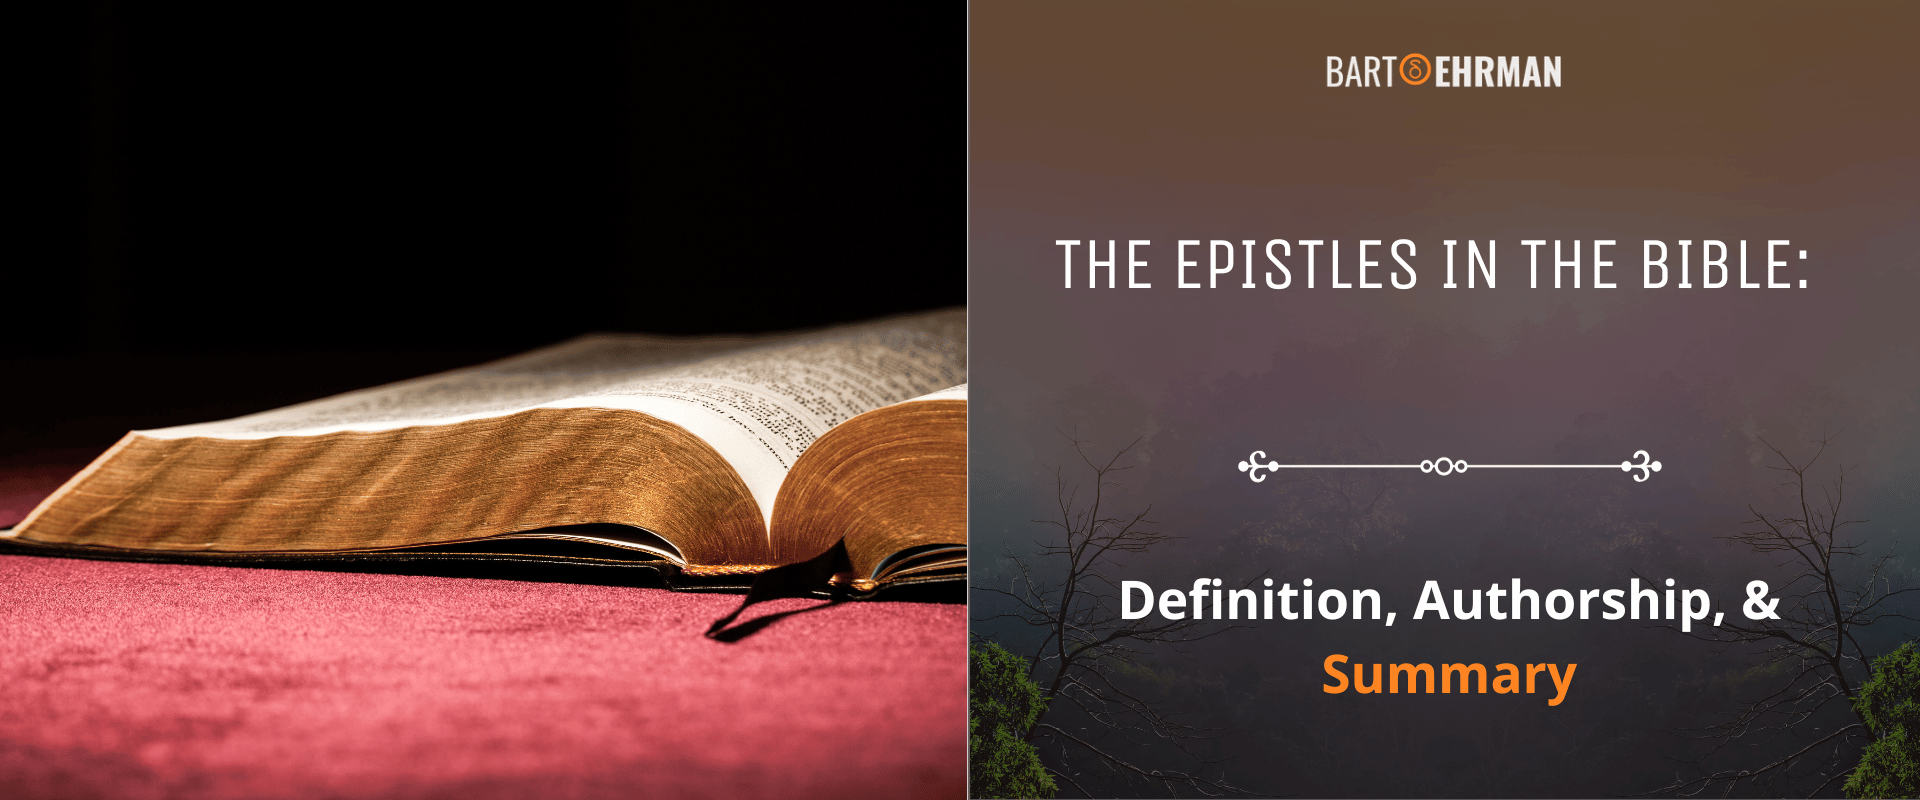 The Epistles in the Bible - Definition, Authorship, & Summary